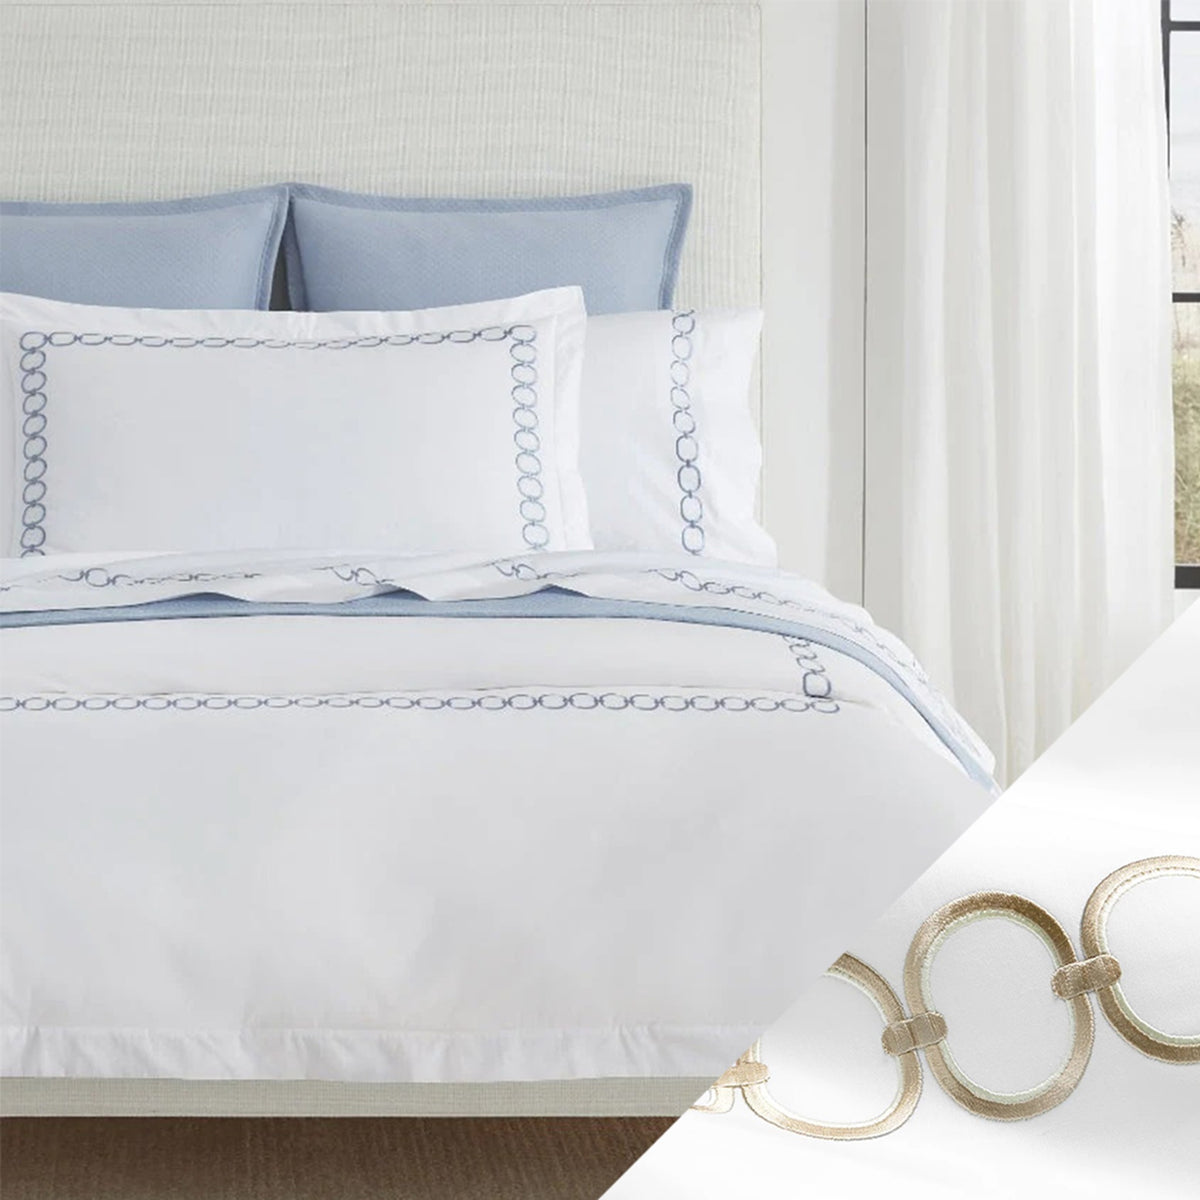 Bed Dressed in Sferra Catena Bedding with Swatch in White/Sand Color